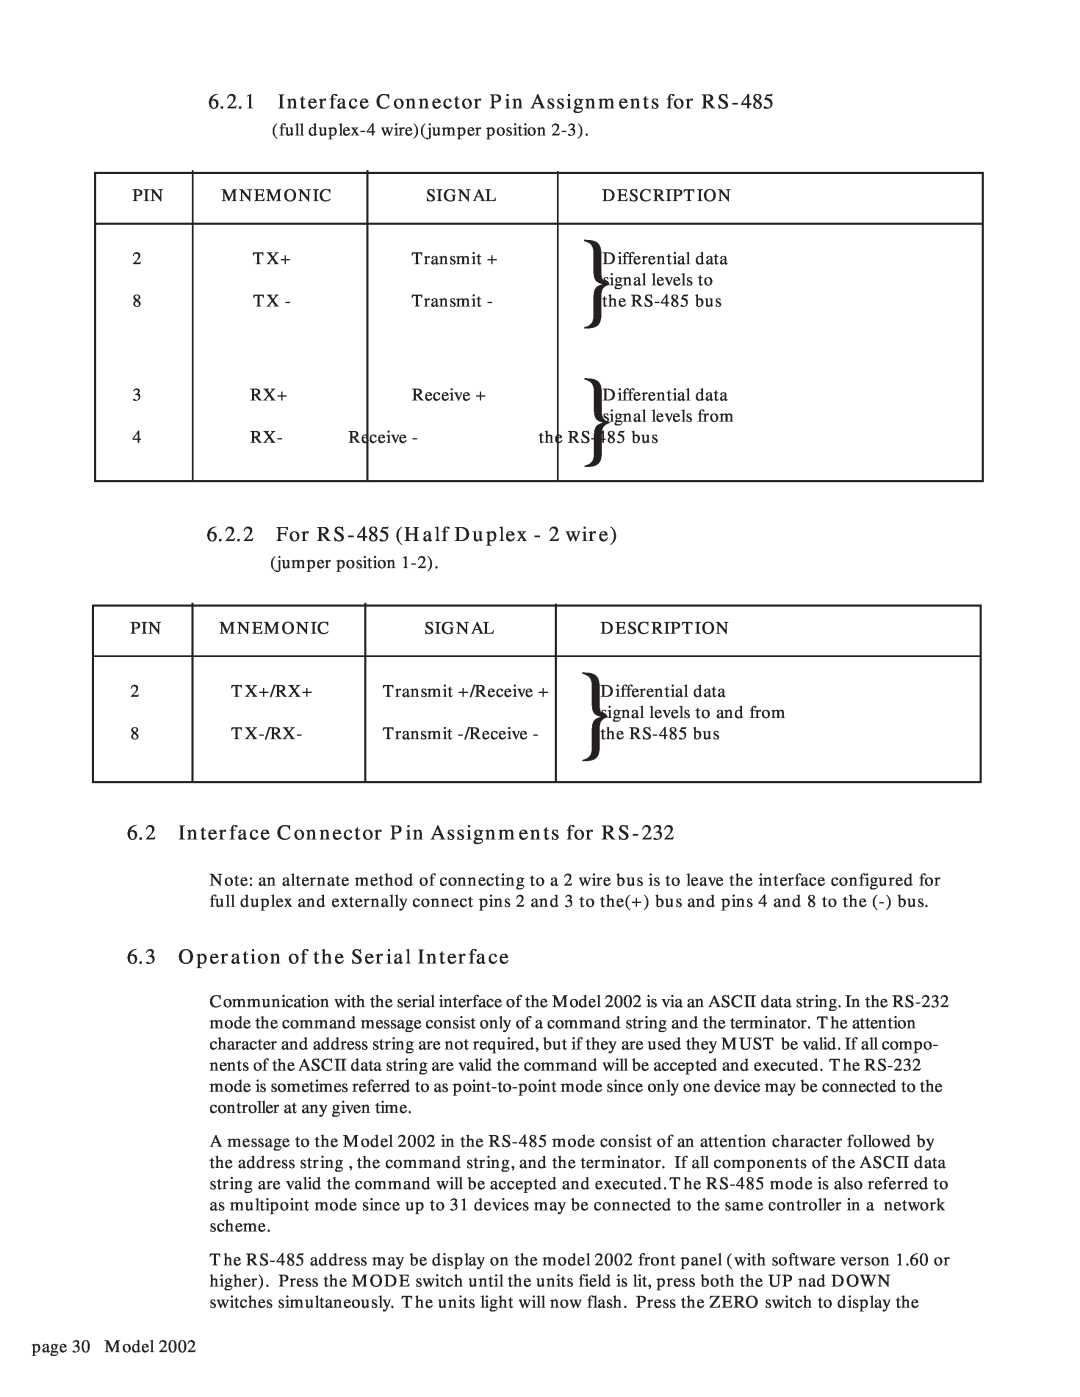 Teledyne 2002 instruction manual Interface Connector Pin Assignments for RS-485, For RS-485 Half Duplex - 2 wire 